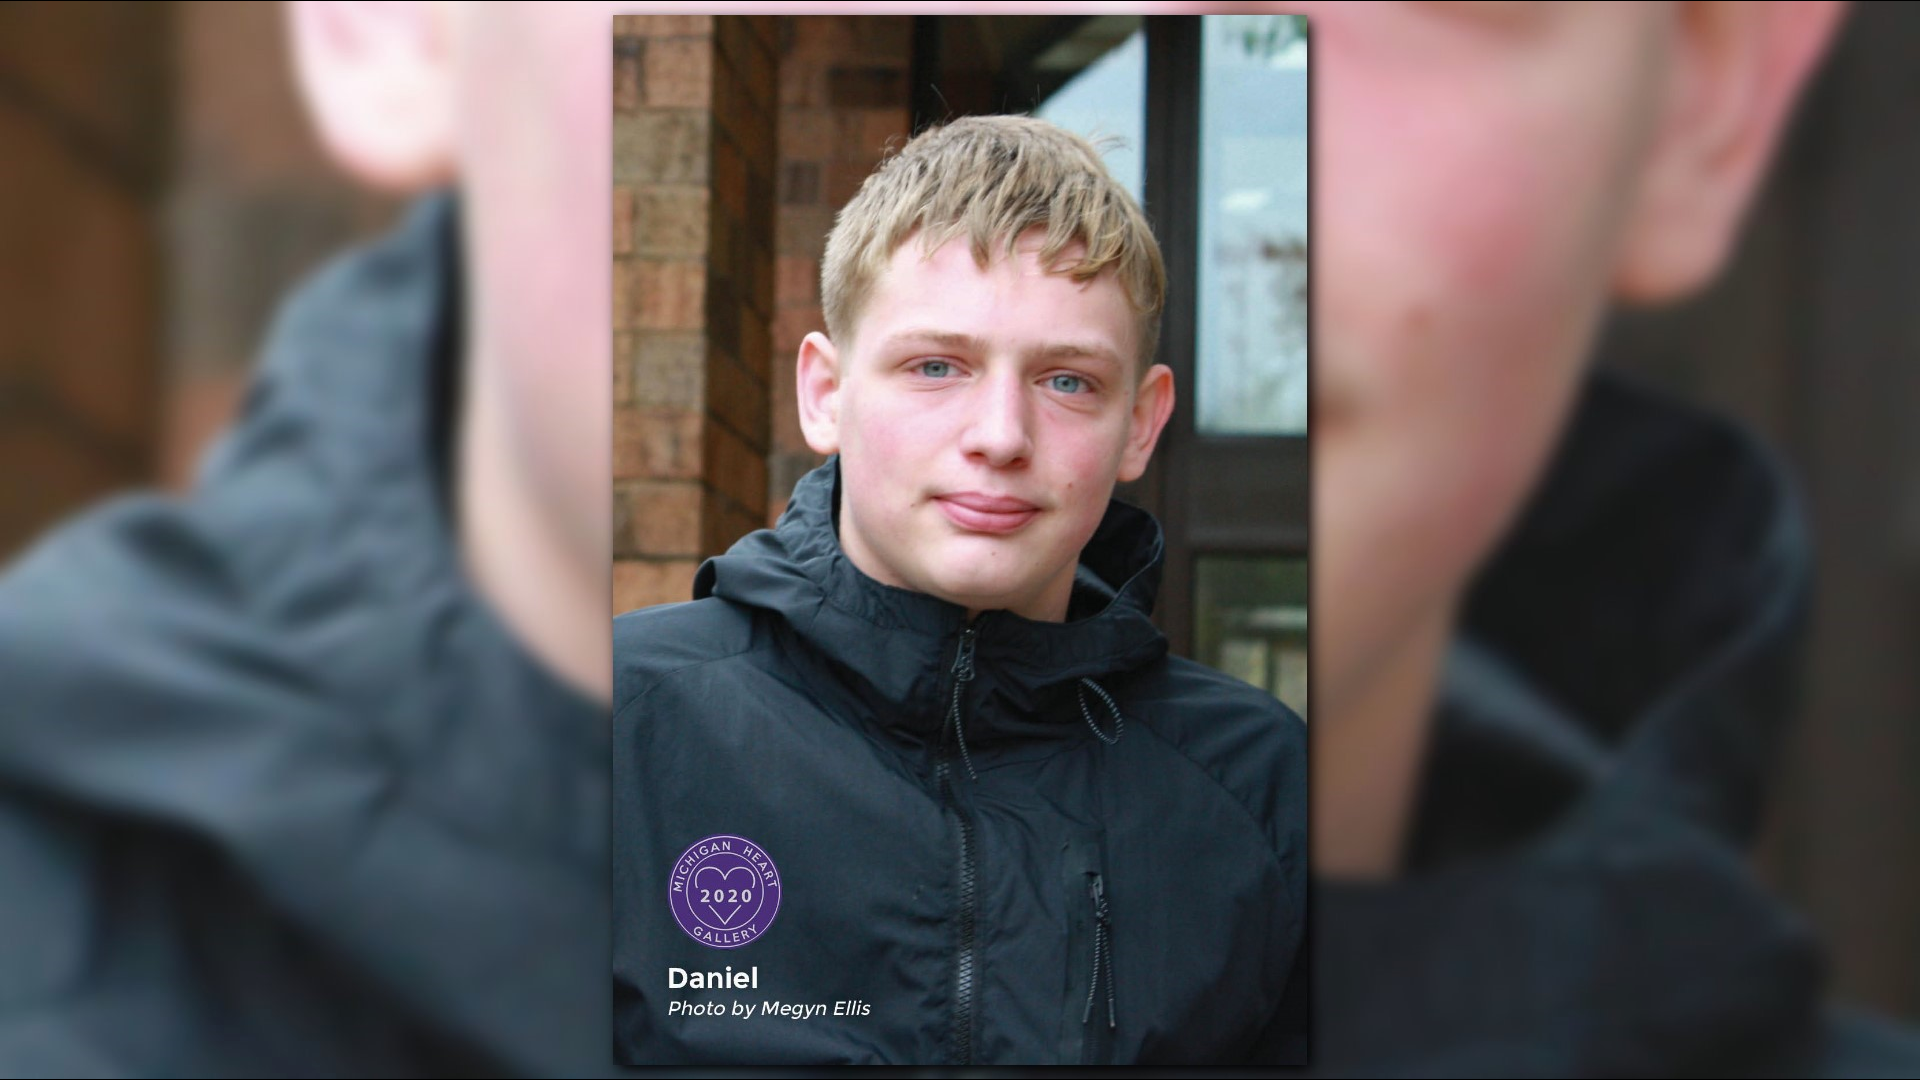 Get to know 16-Year-Old Daniel and help him find a forever family.